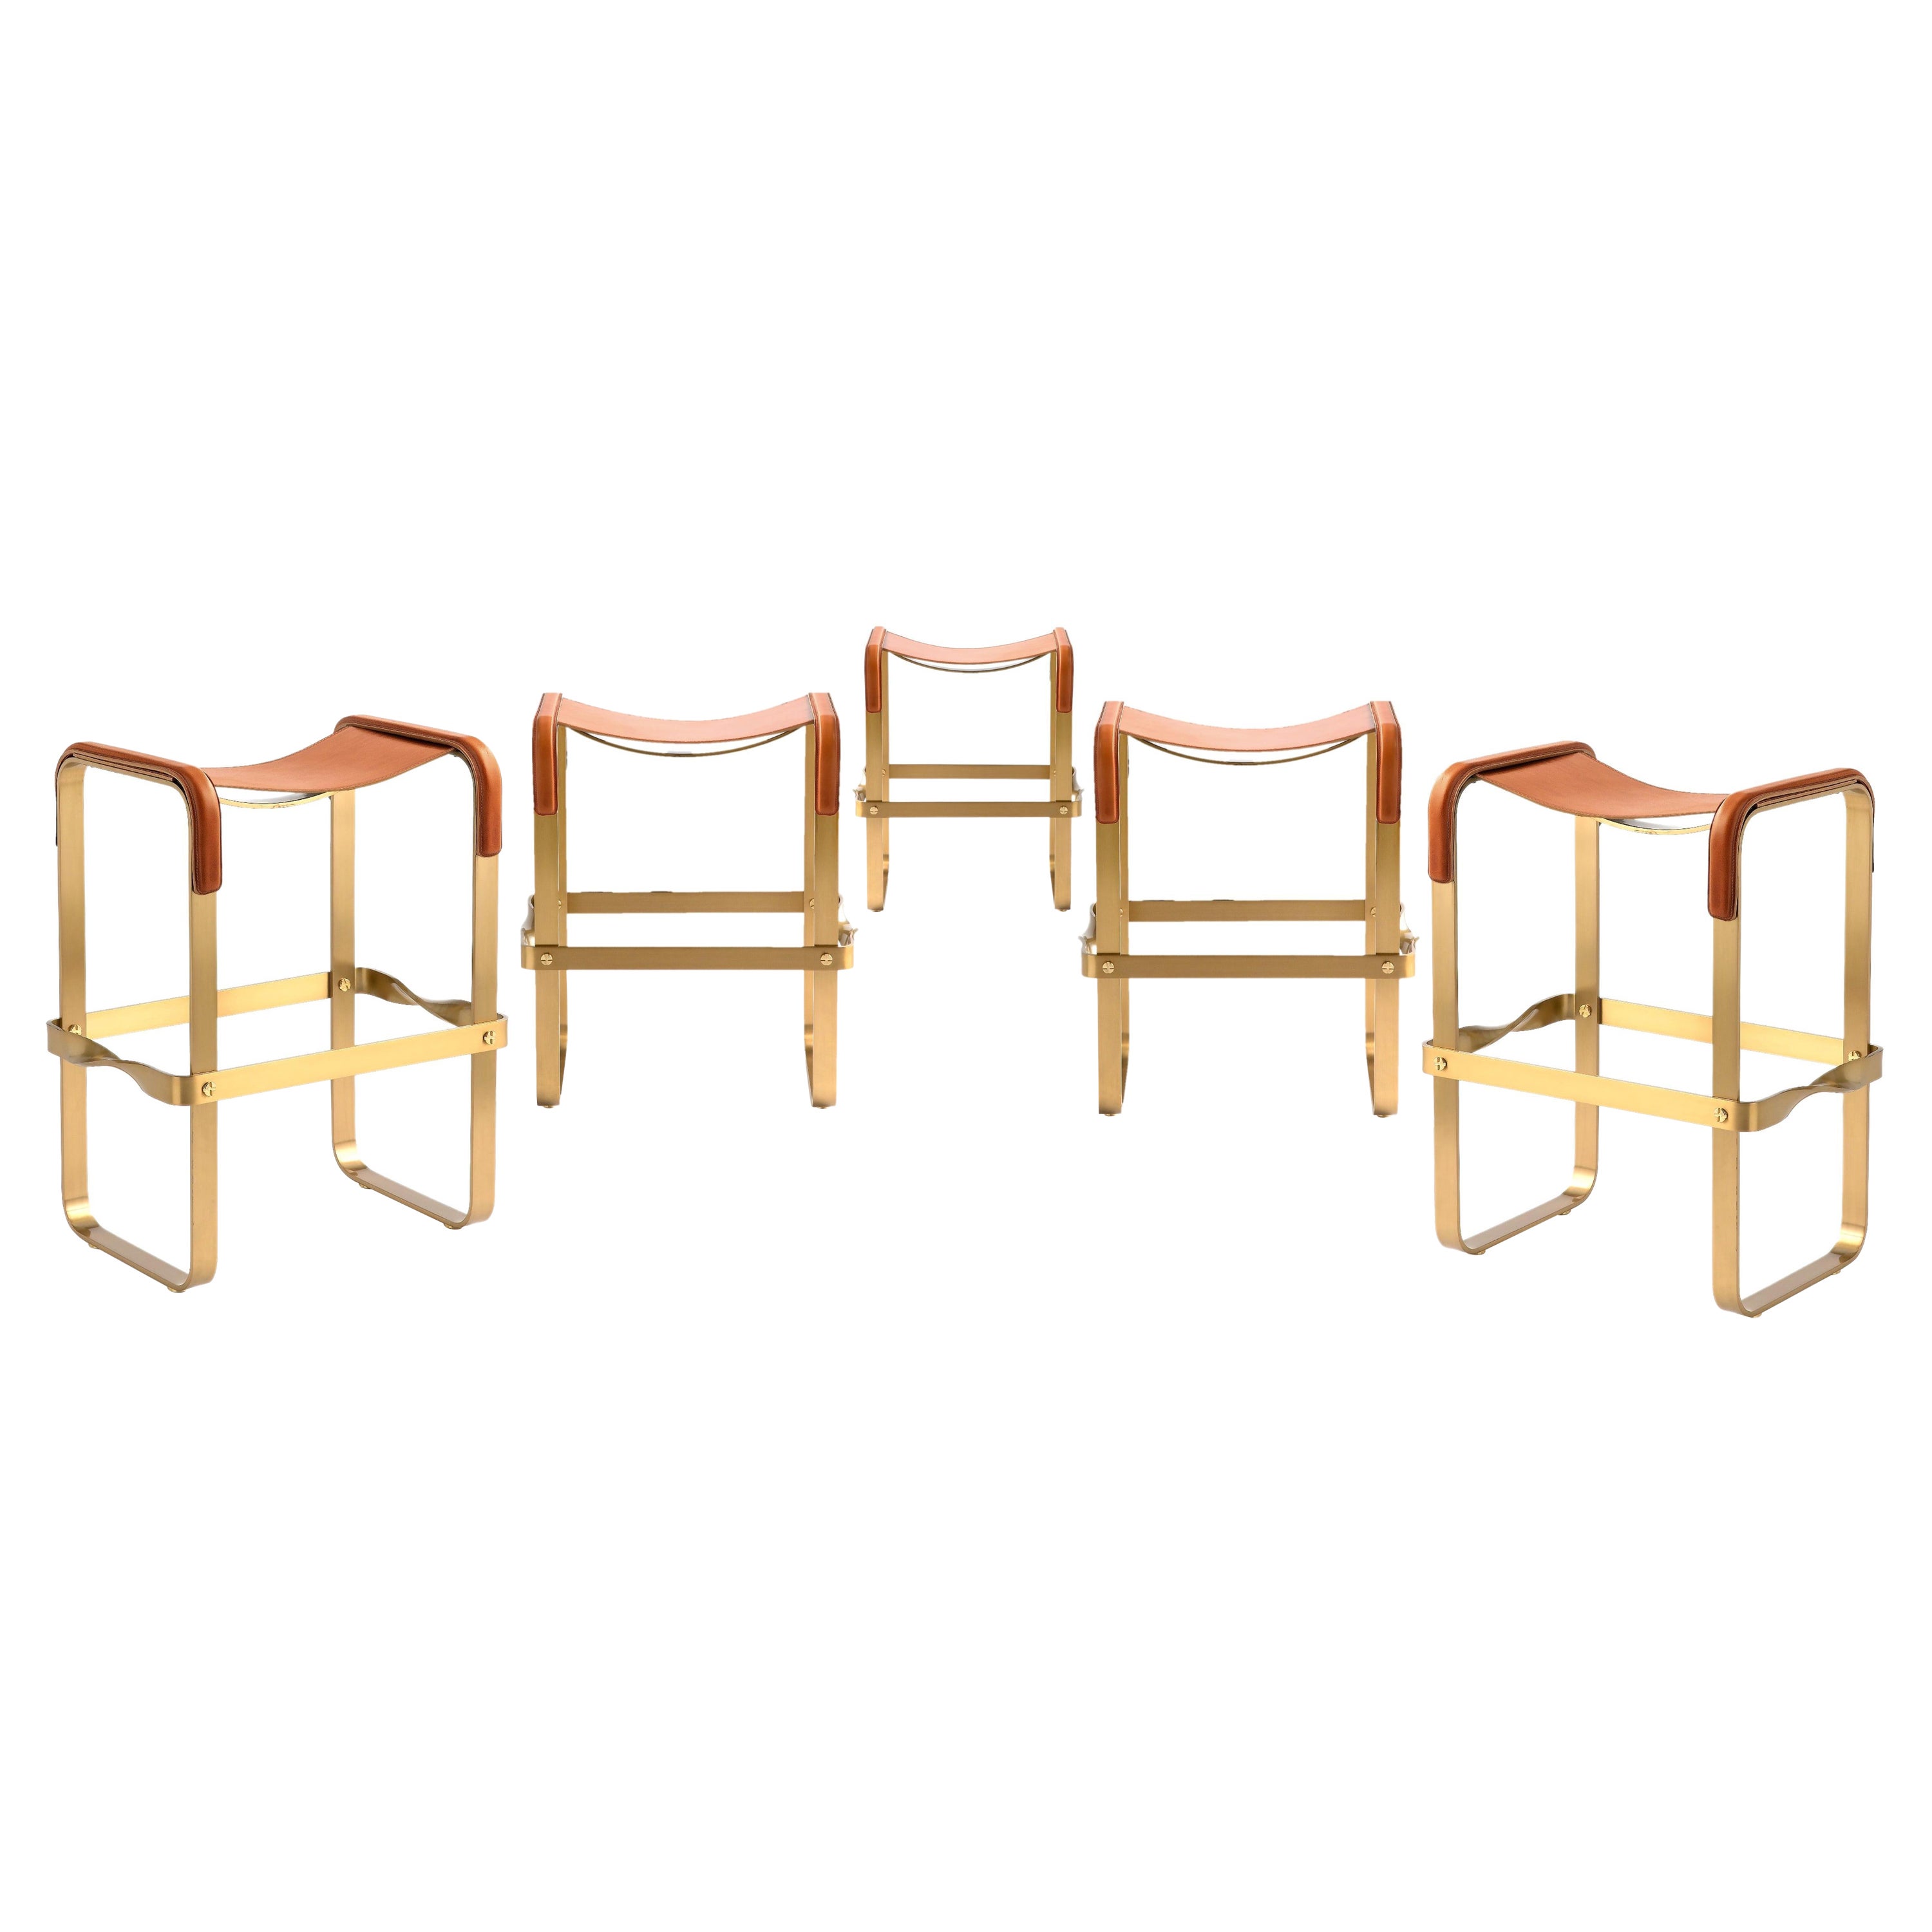 Set of 5 Counter Stool Contemporary Design, Aged Brass & Natural Tobacco Leather